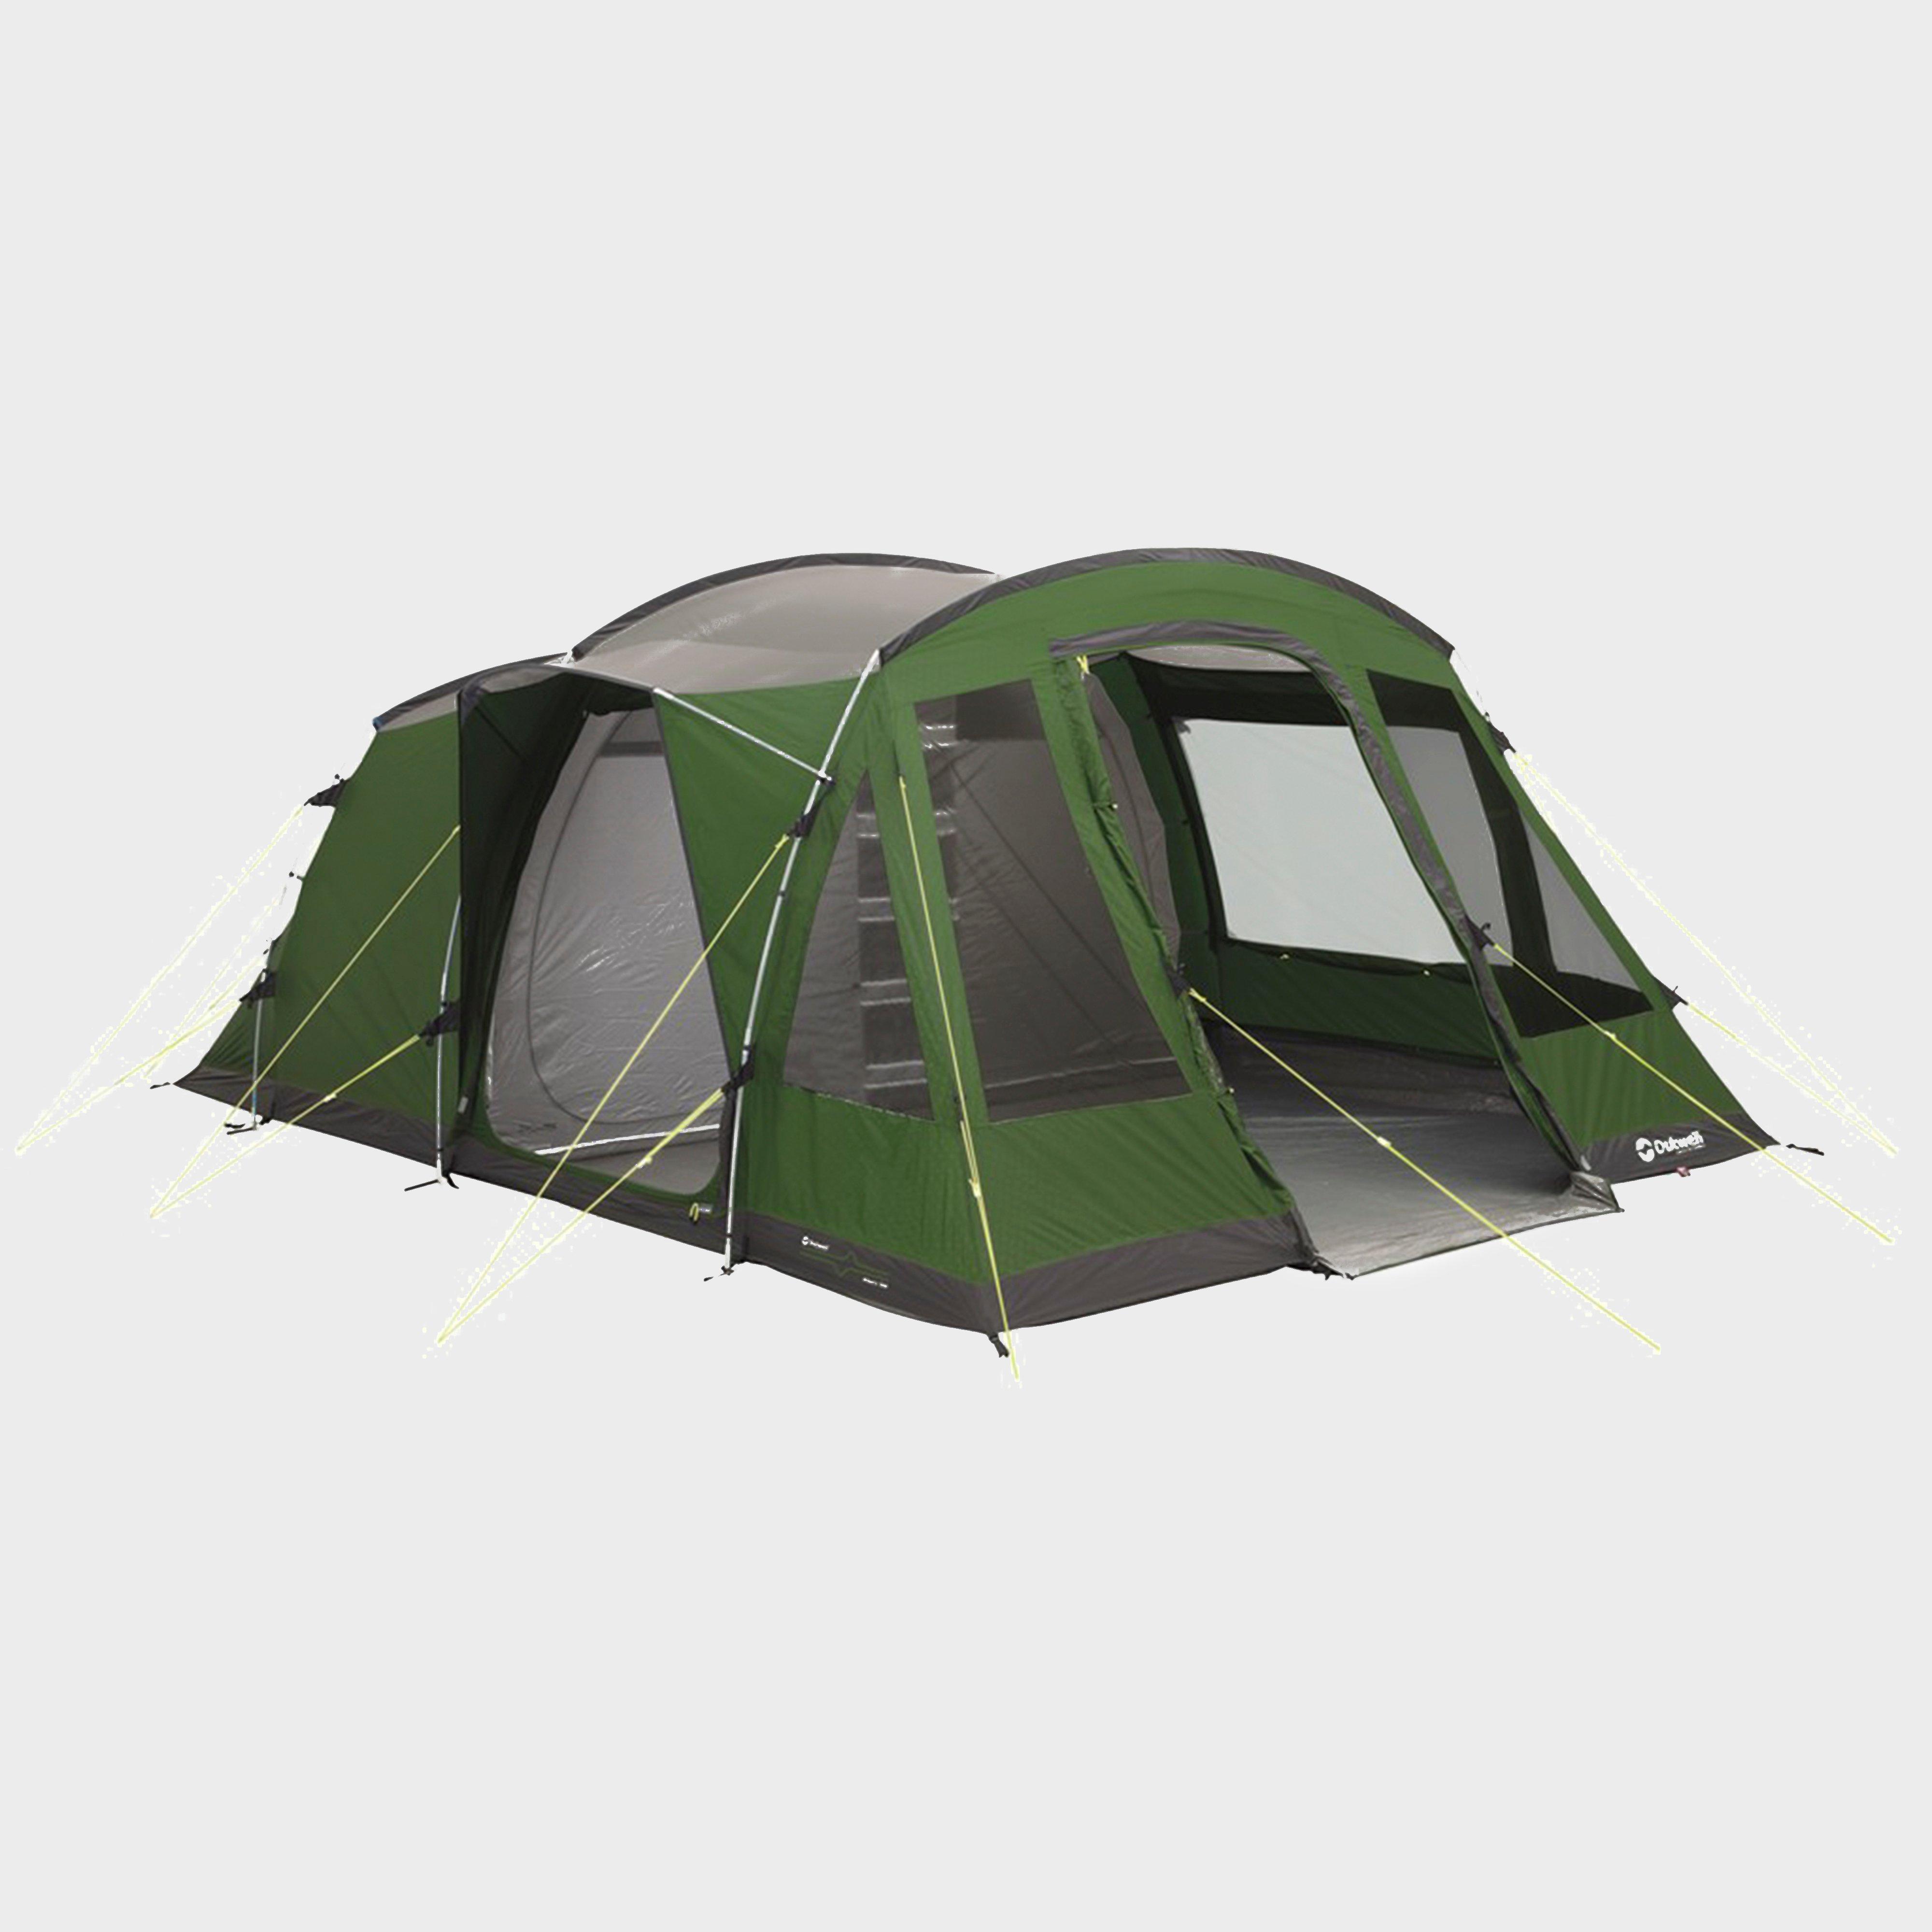 Outwell Albany 500 Tent Footprint 500 x 350cm 